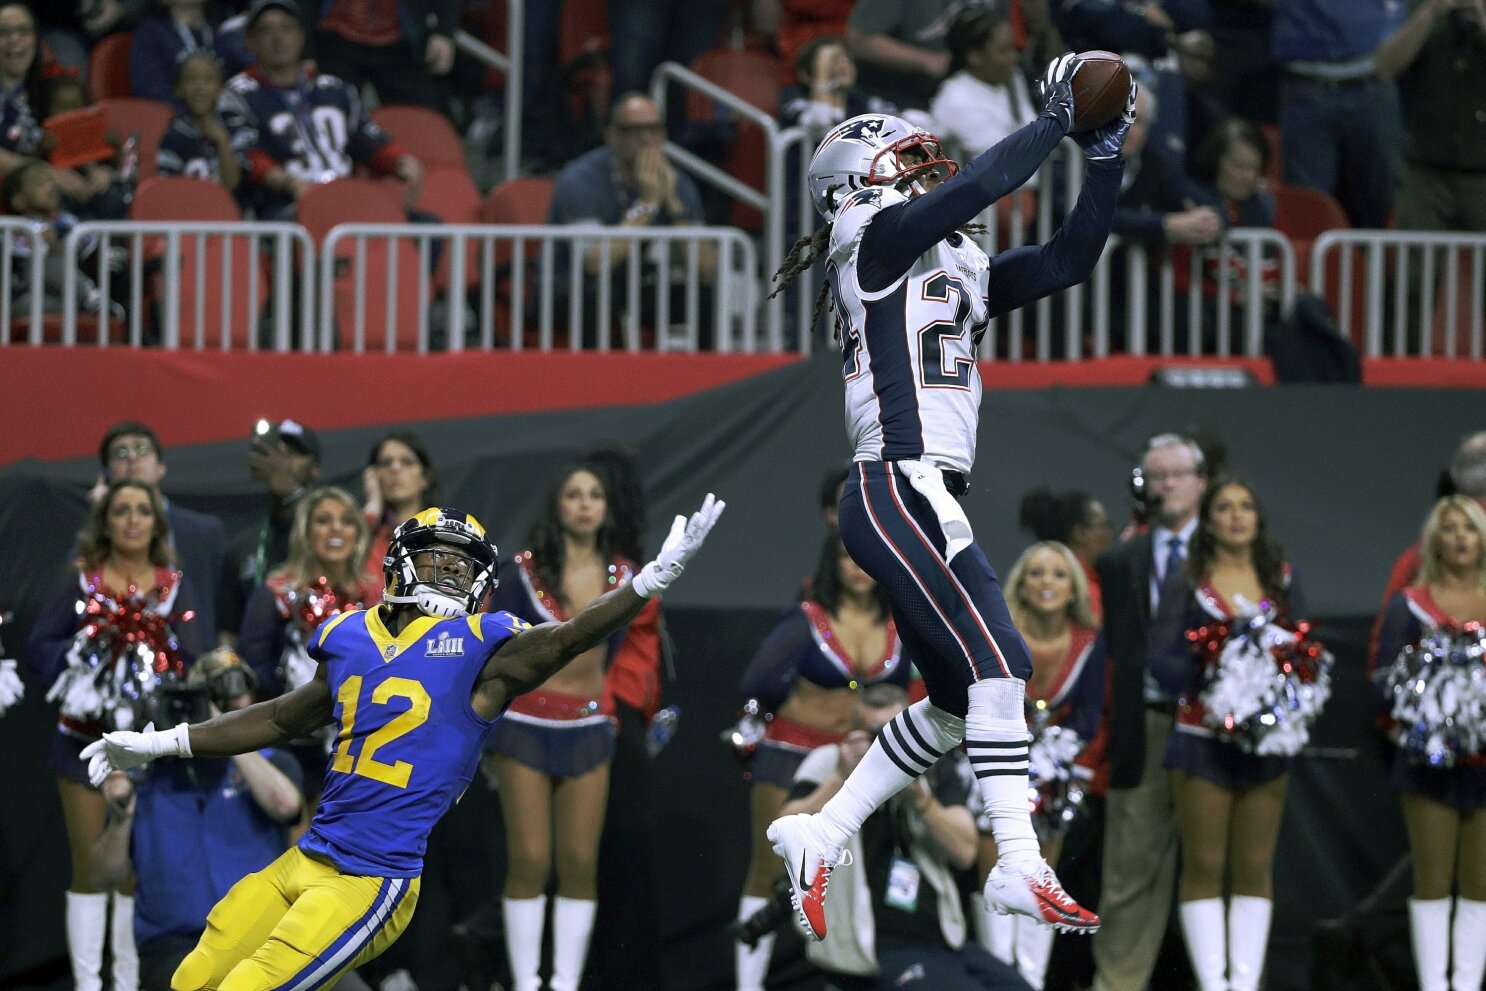 Game Notes: Patriots tie Pittsburgh with six Super Bowl wins